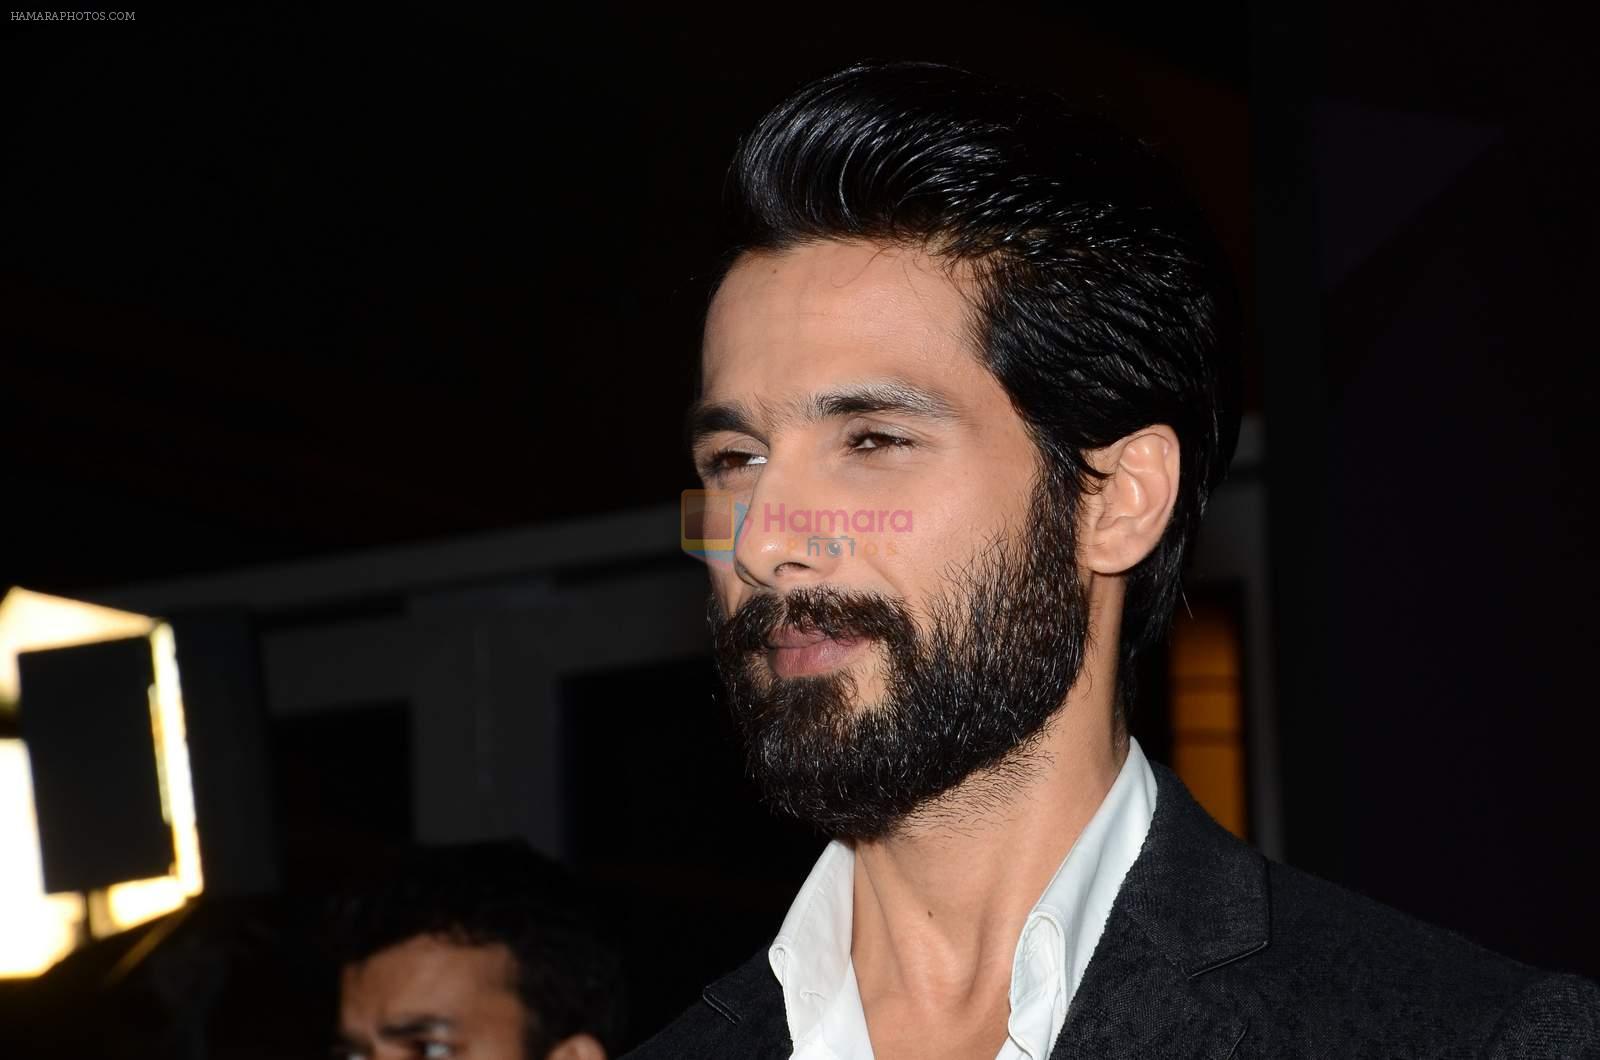 Shahid Kapoor at GQ men of the year 2015 on 26th Sept 2015